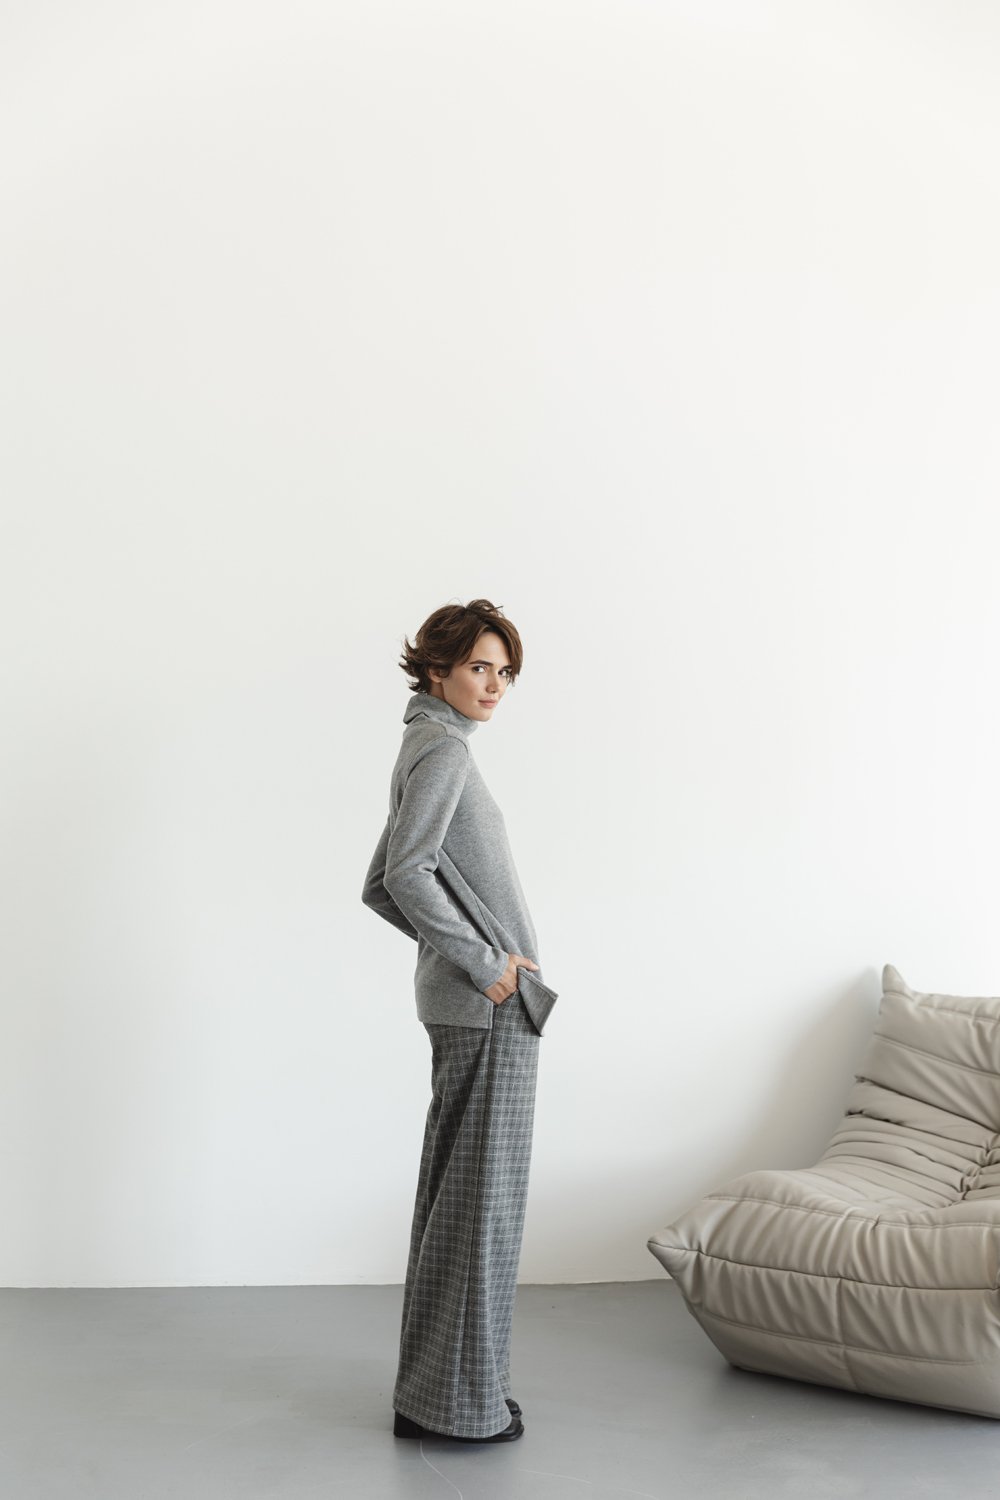 Gray oversized knit sweater with side slits